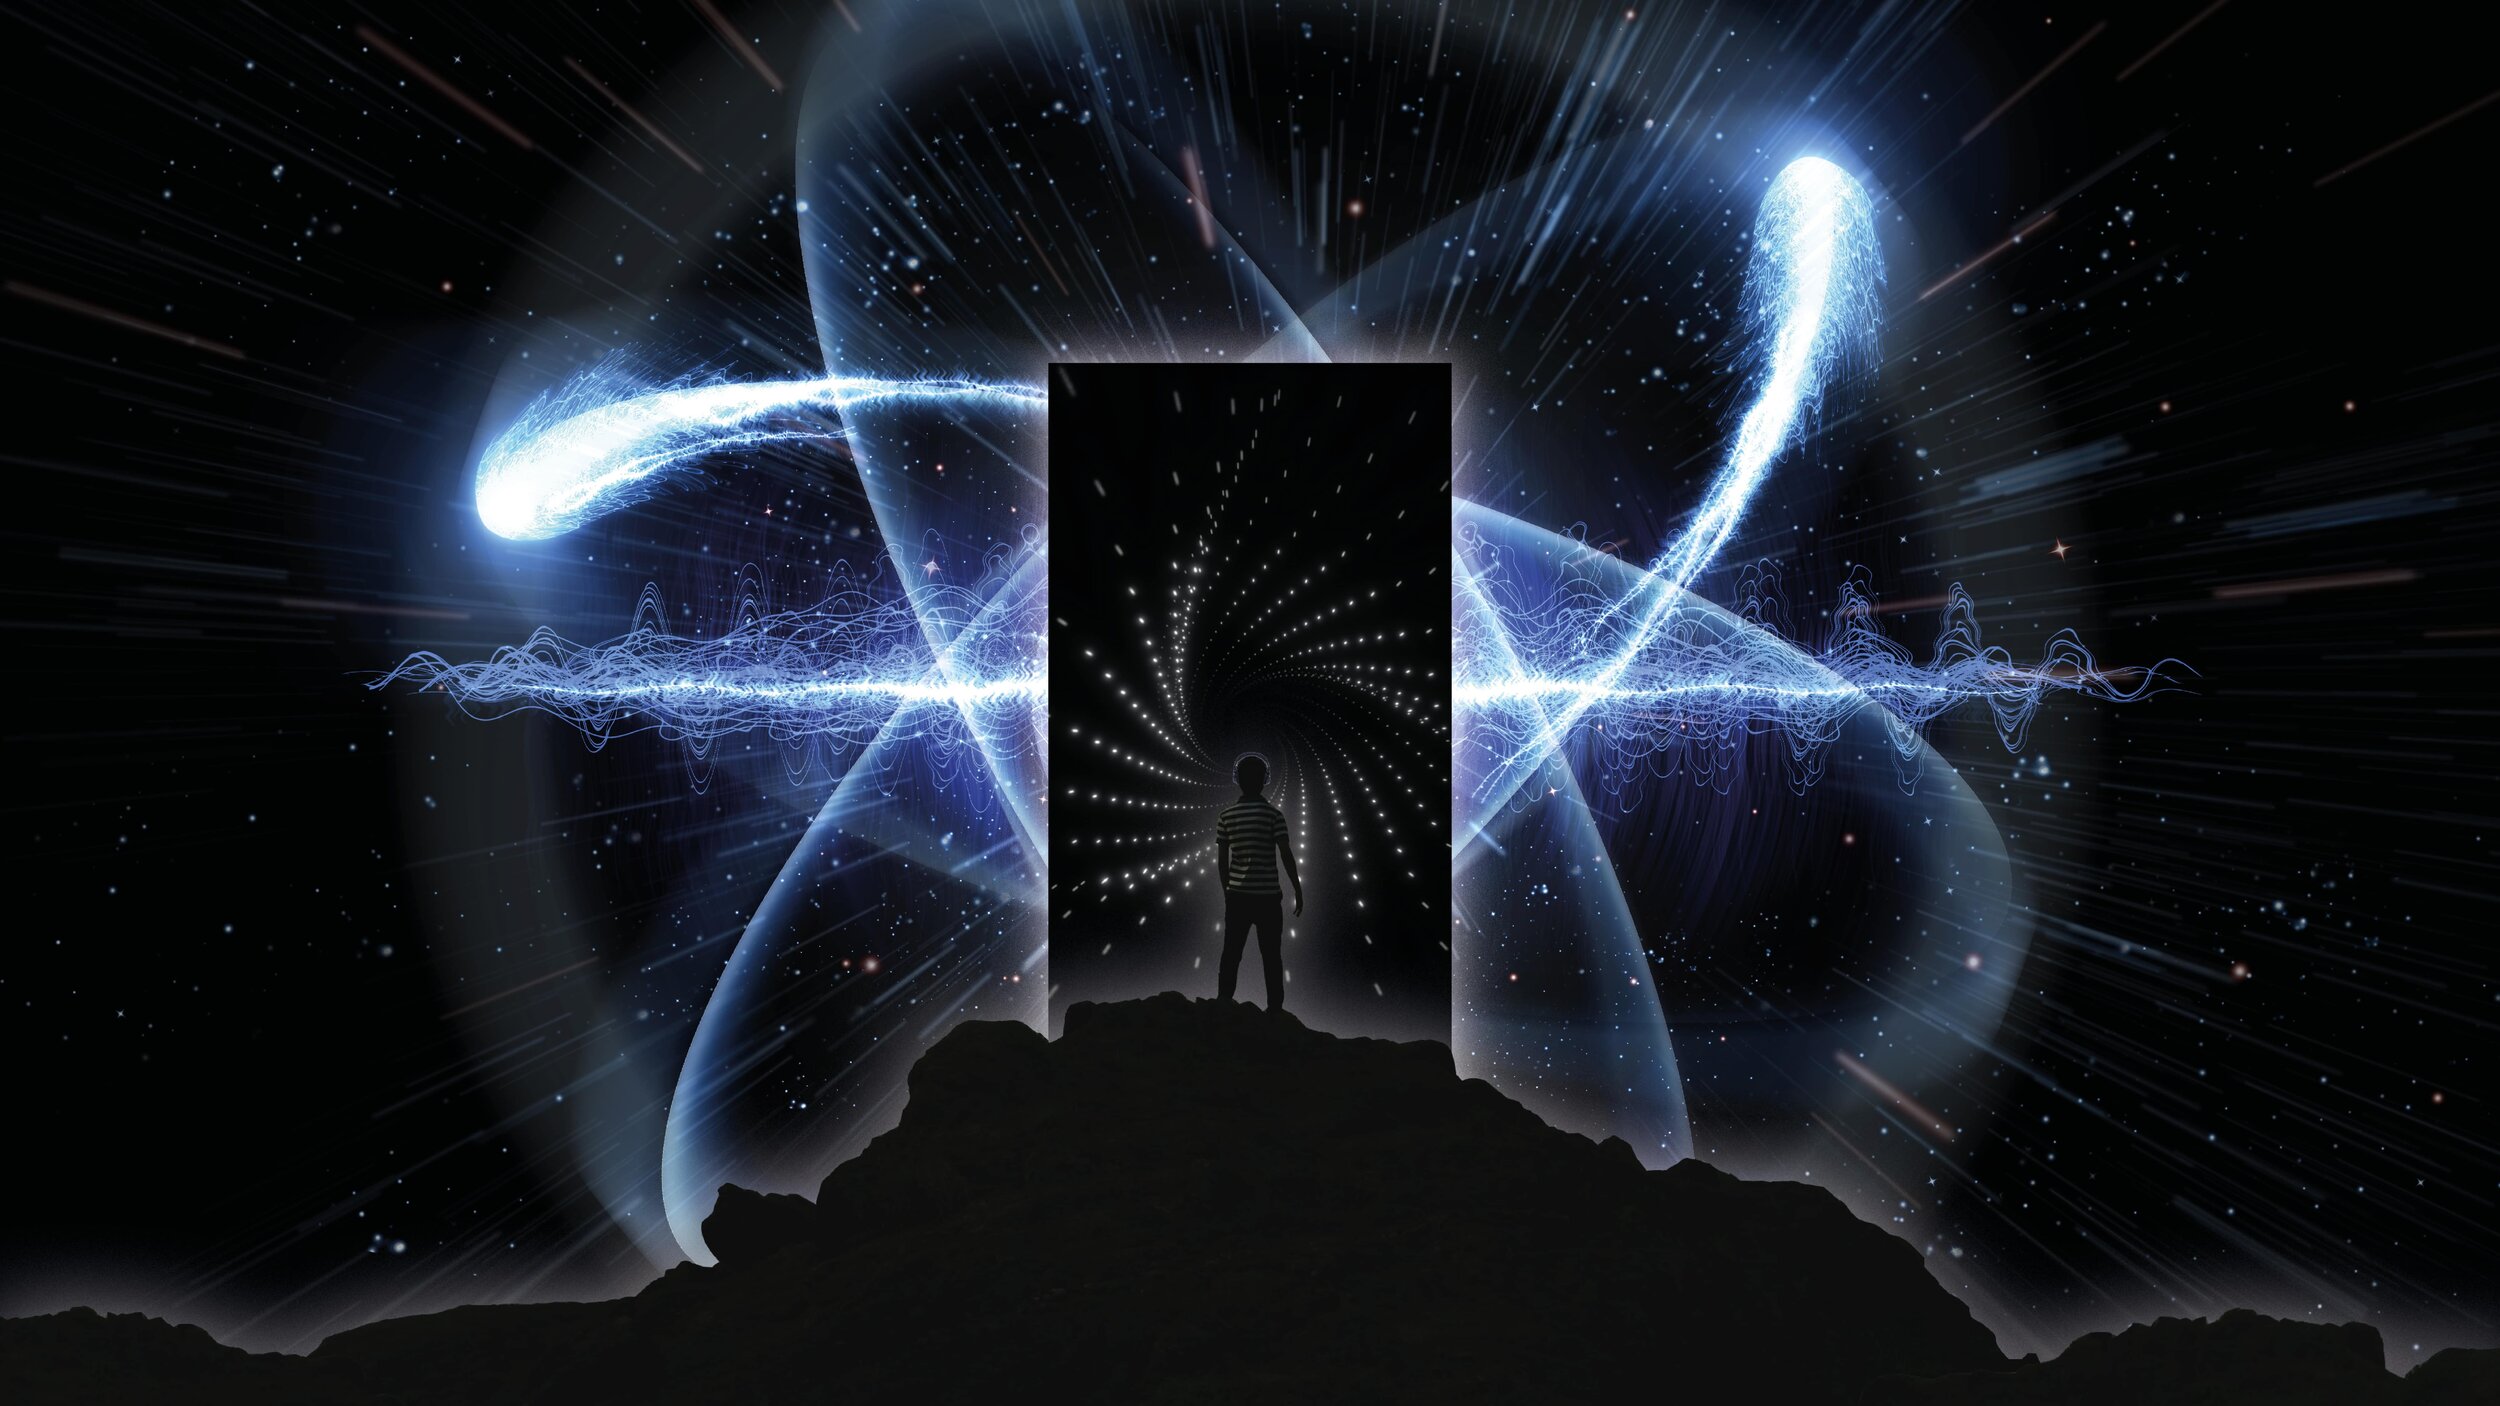 An artist's impression of a scene from the monolith Audio Experience - The Heart of an Atom